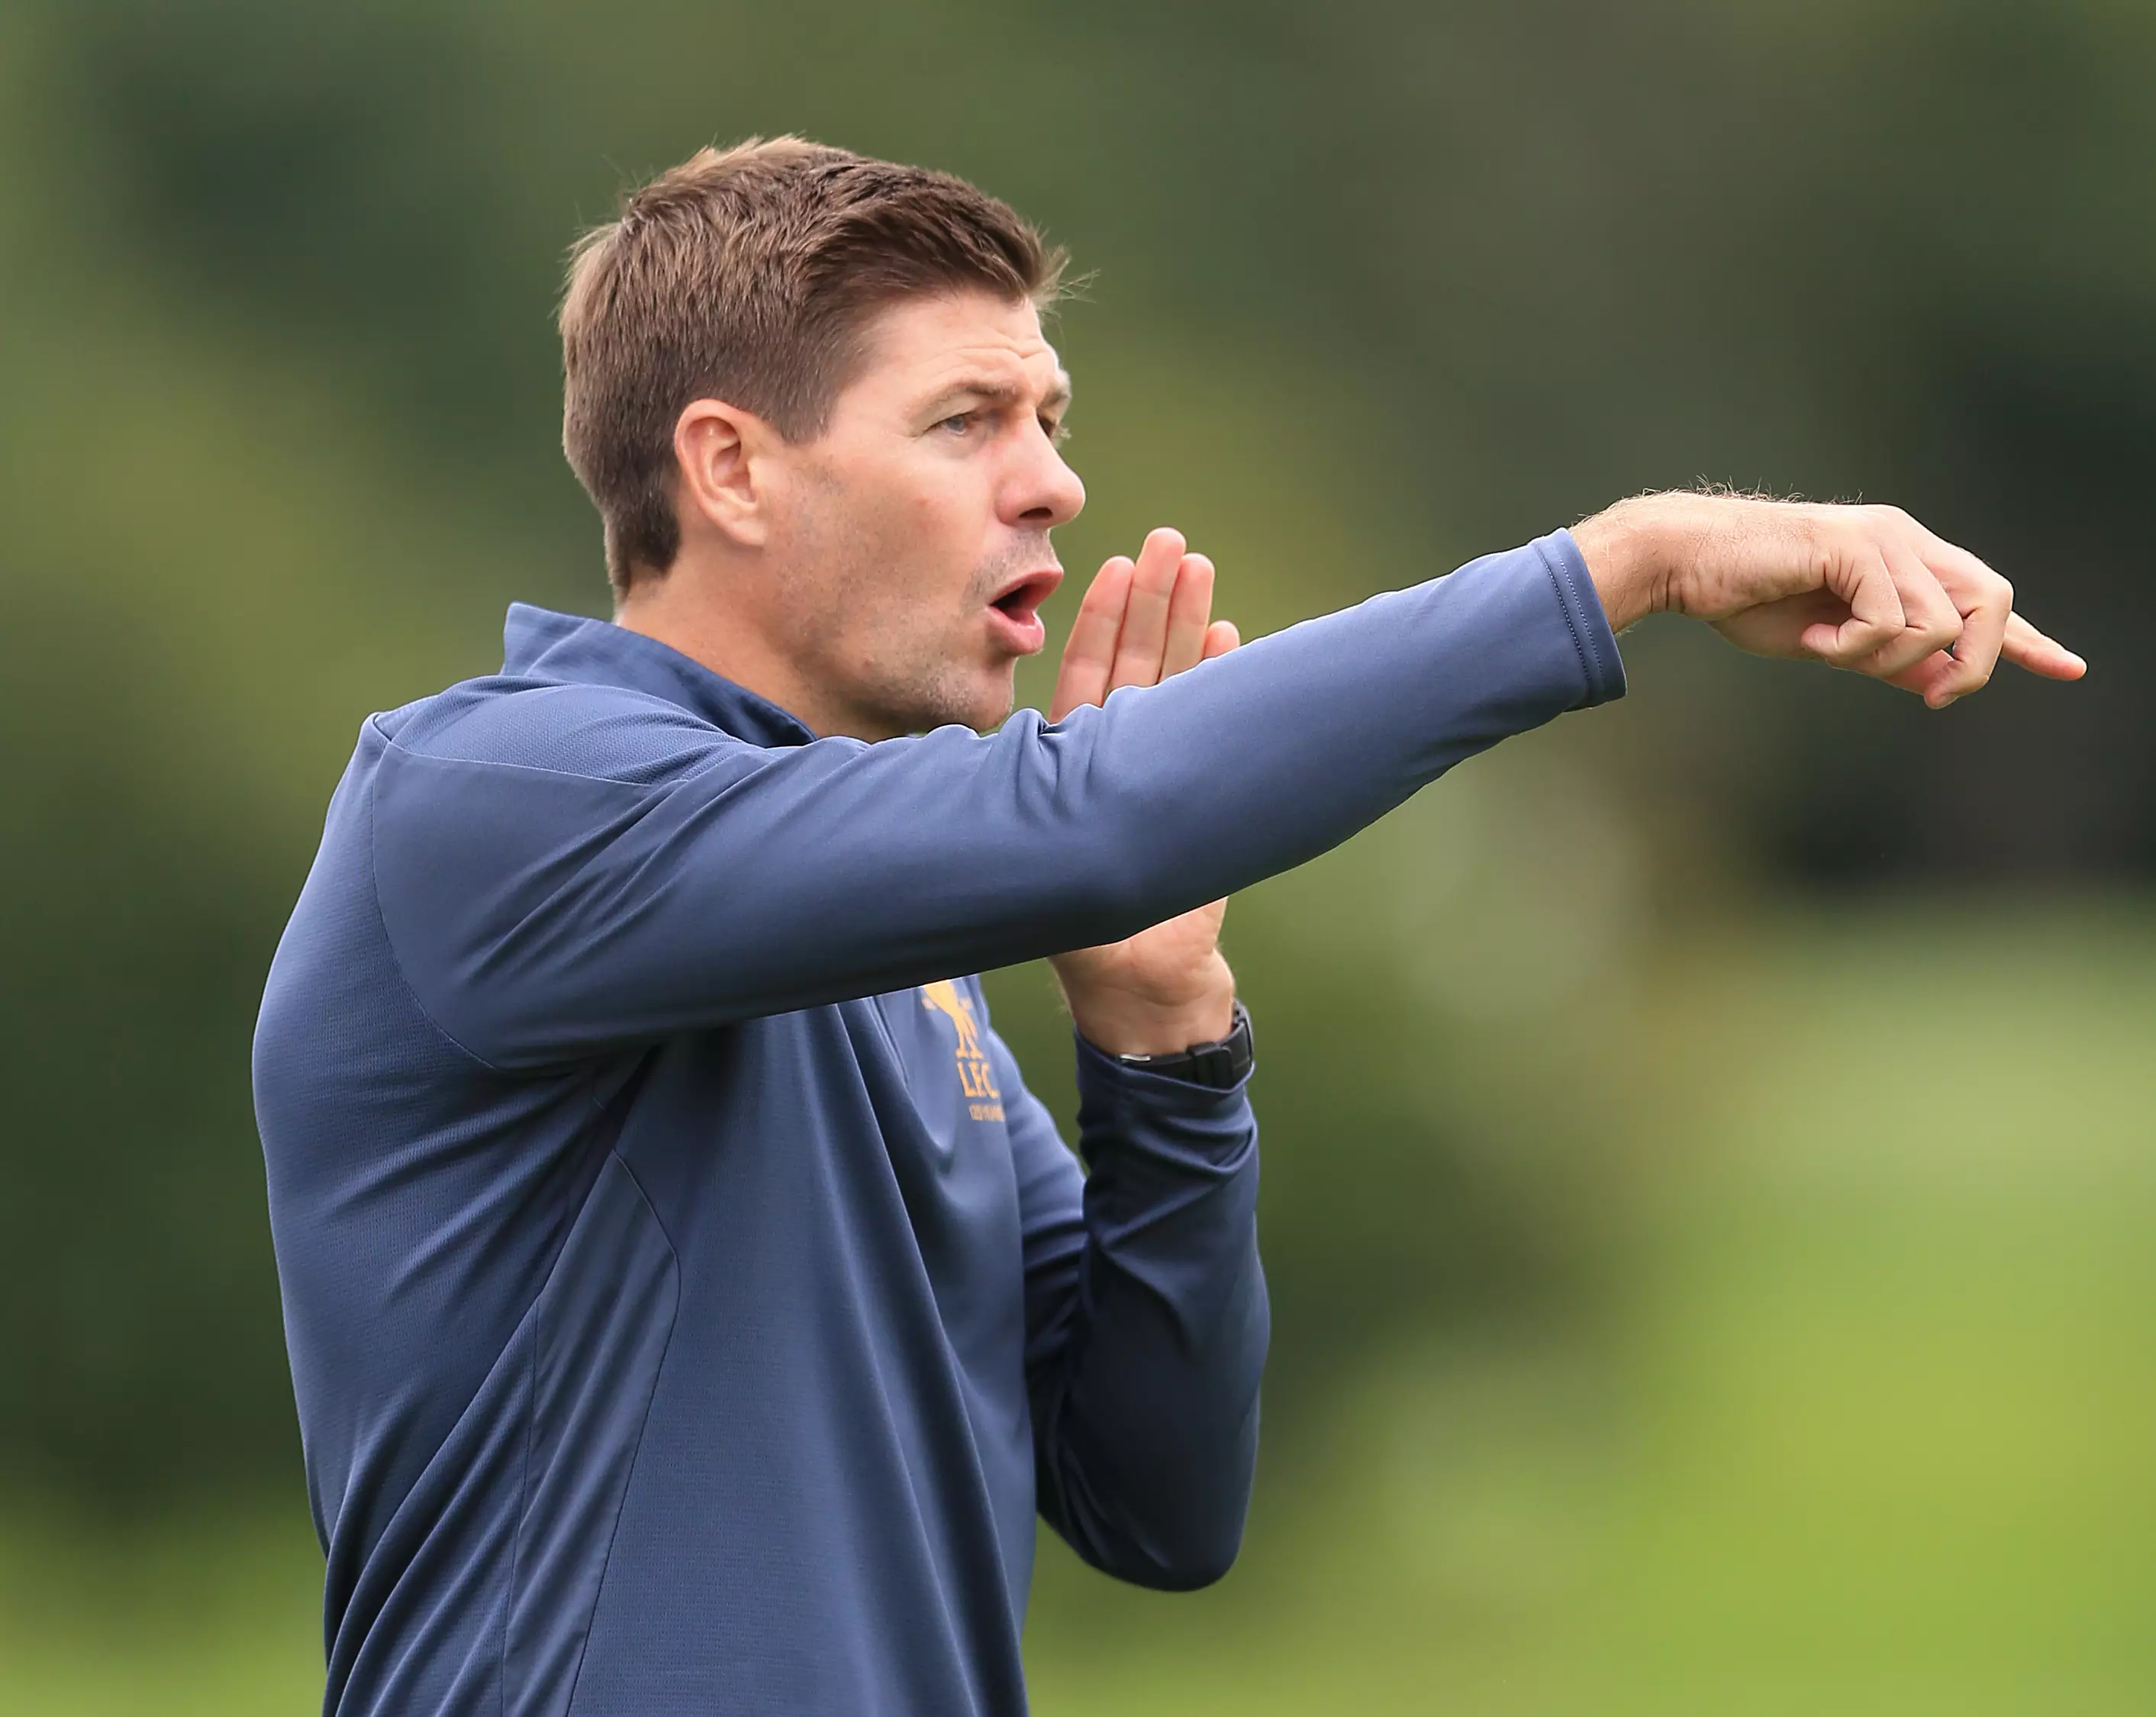 Gerrard's hand signals will be on point after learning from Rafa Benitez. Image: PA Images